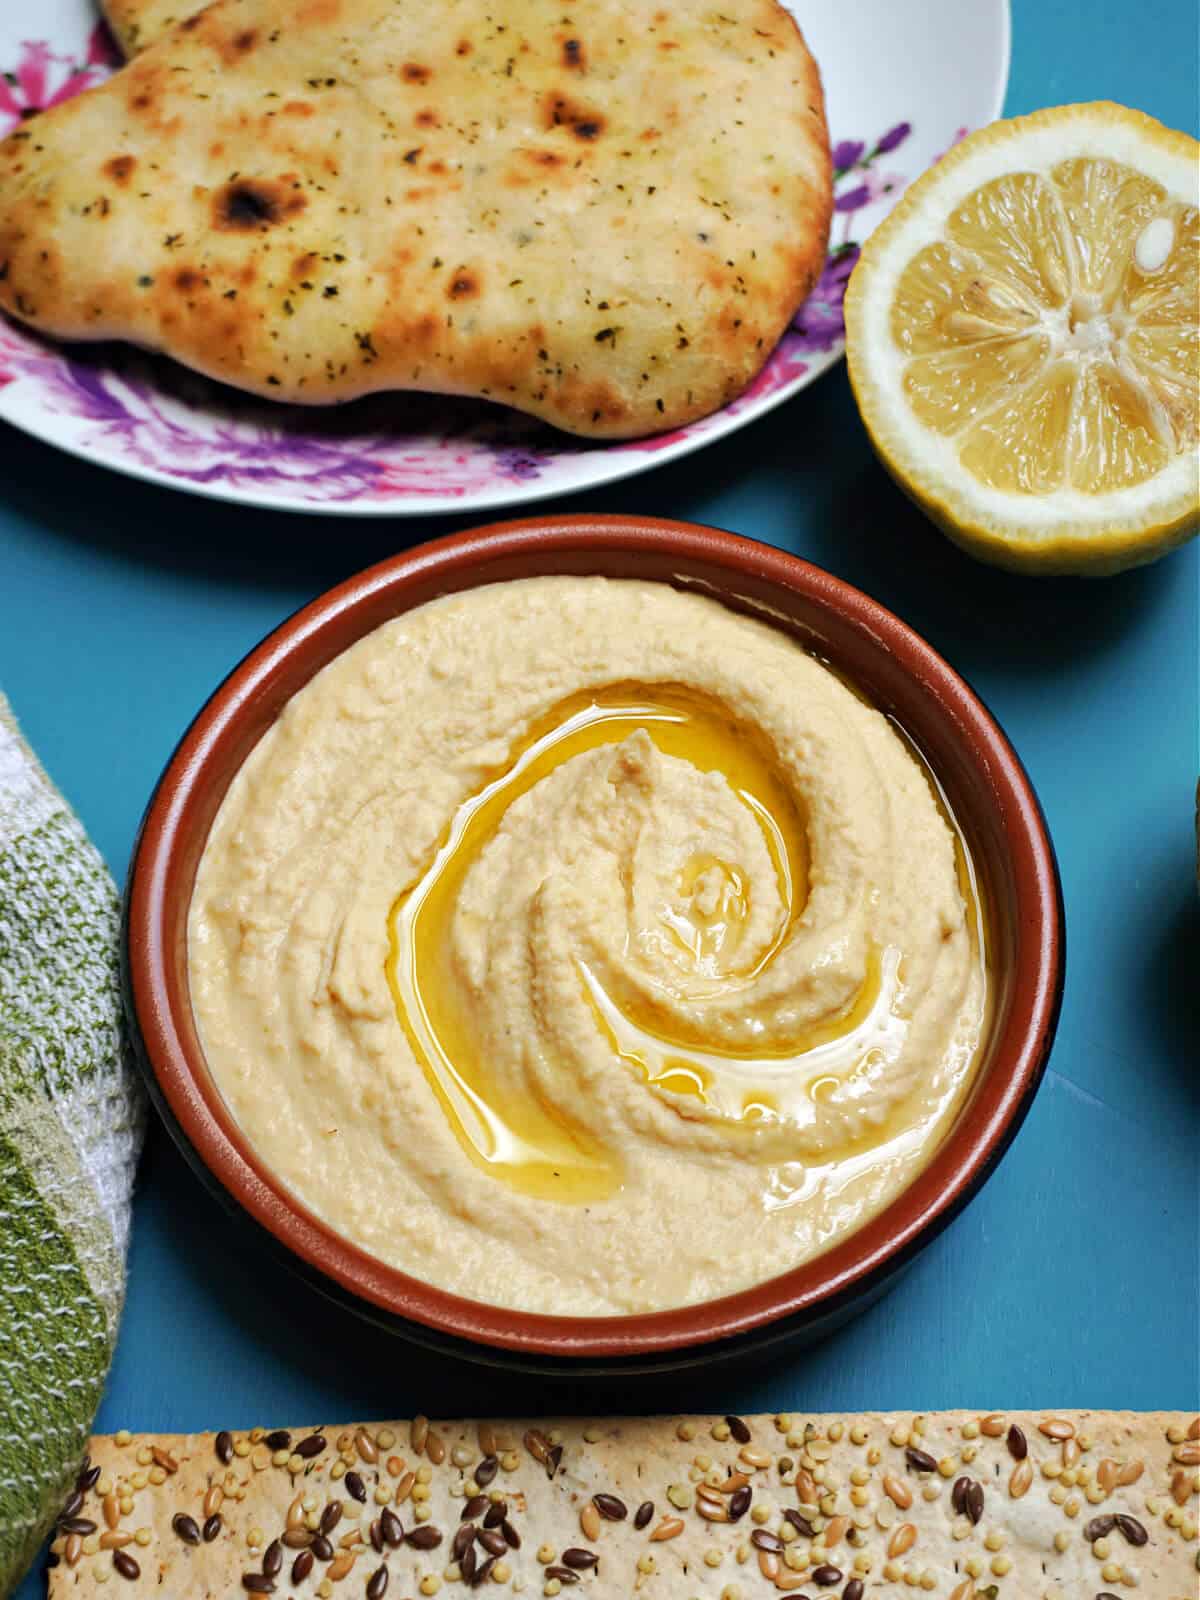 Overhead shoot of a brown ramekin with humus topped with olive oil, half a lemon and naan bread at the top.